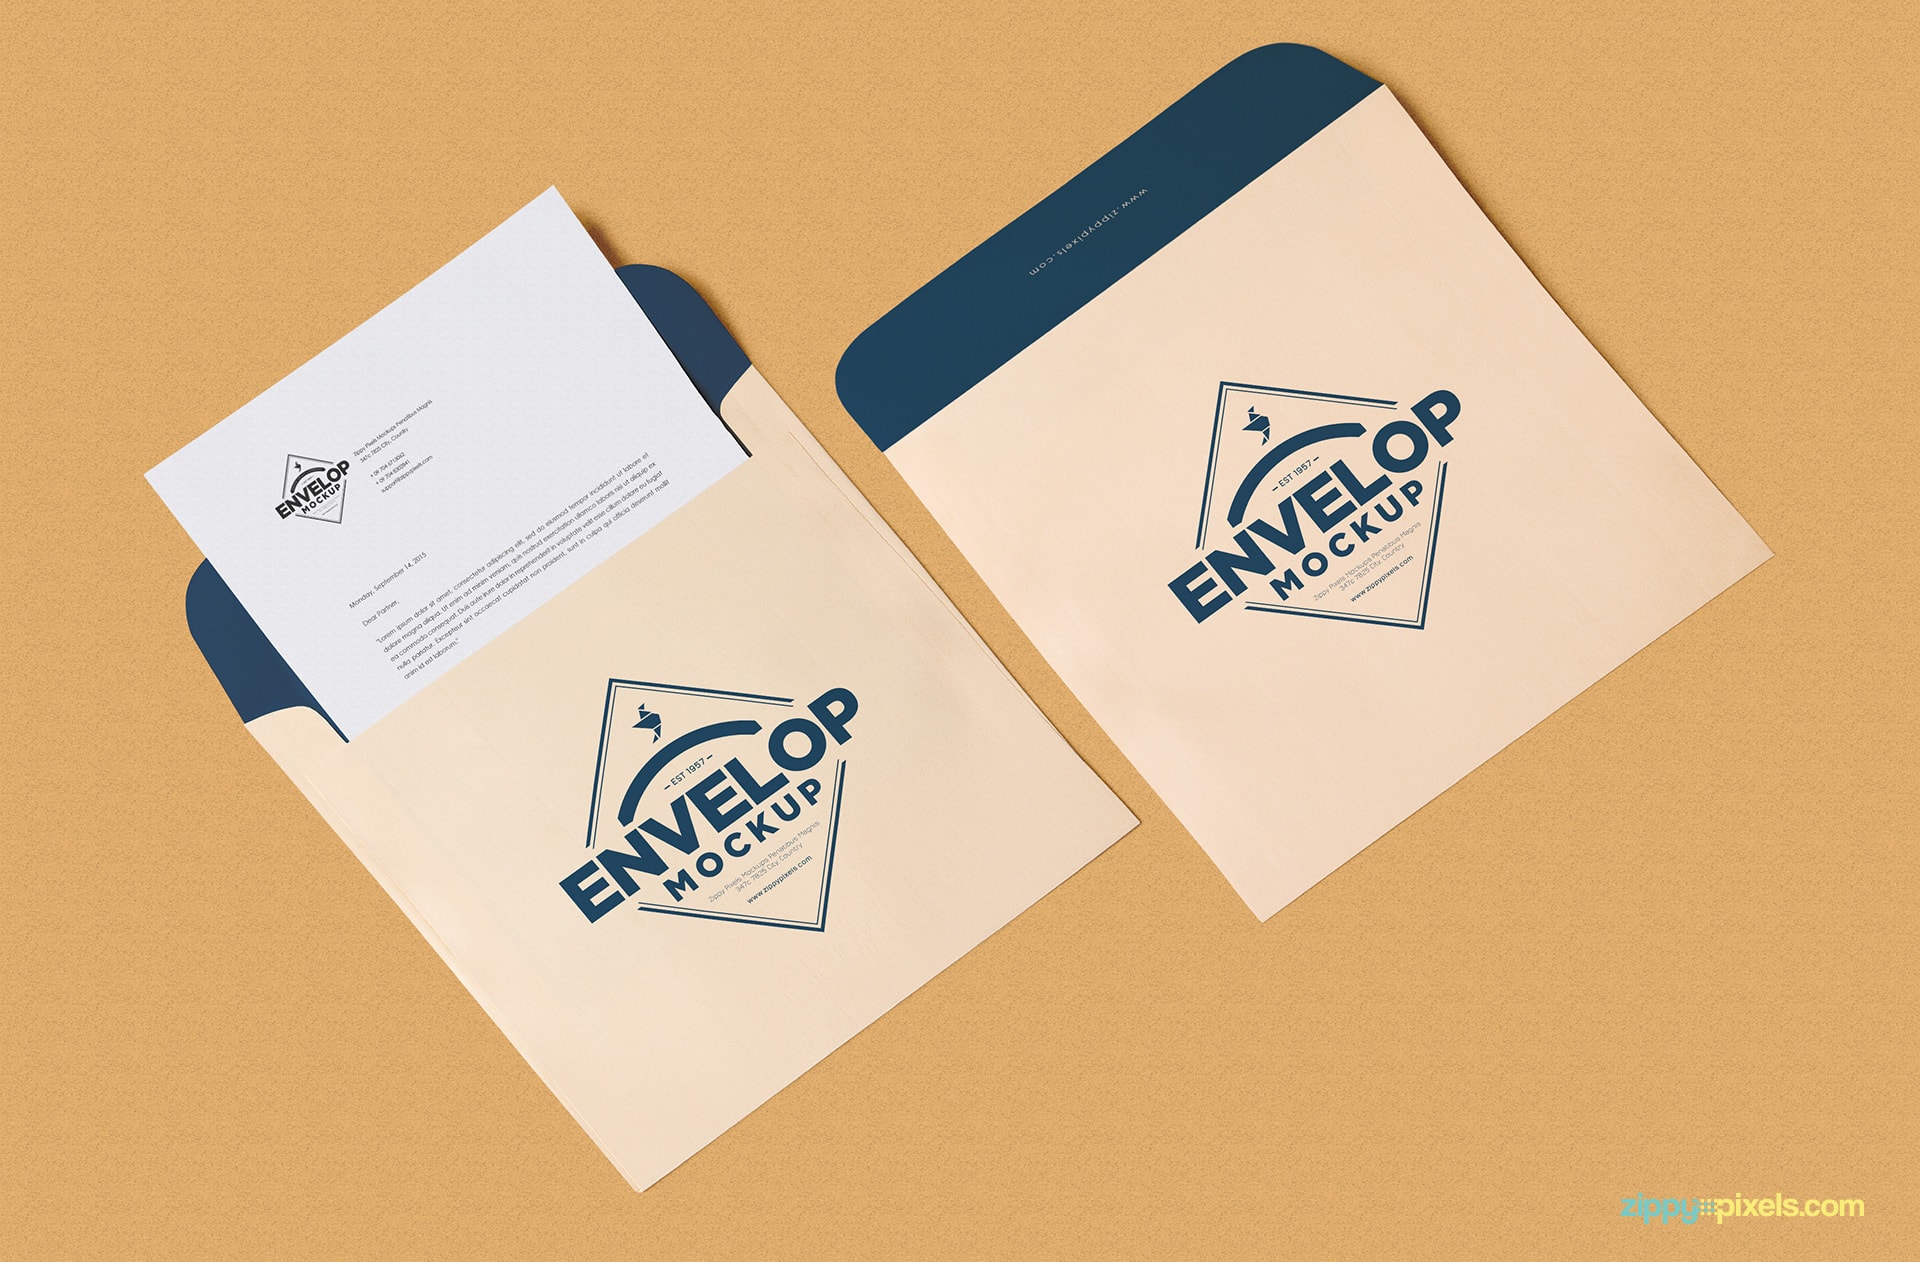 A free envelope with letterhead mockup